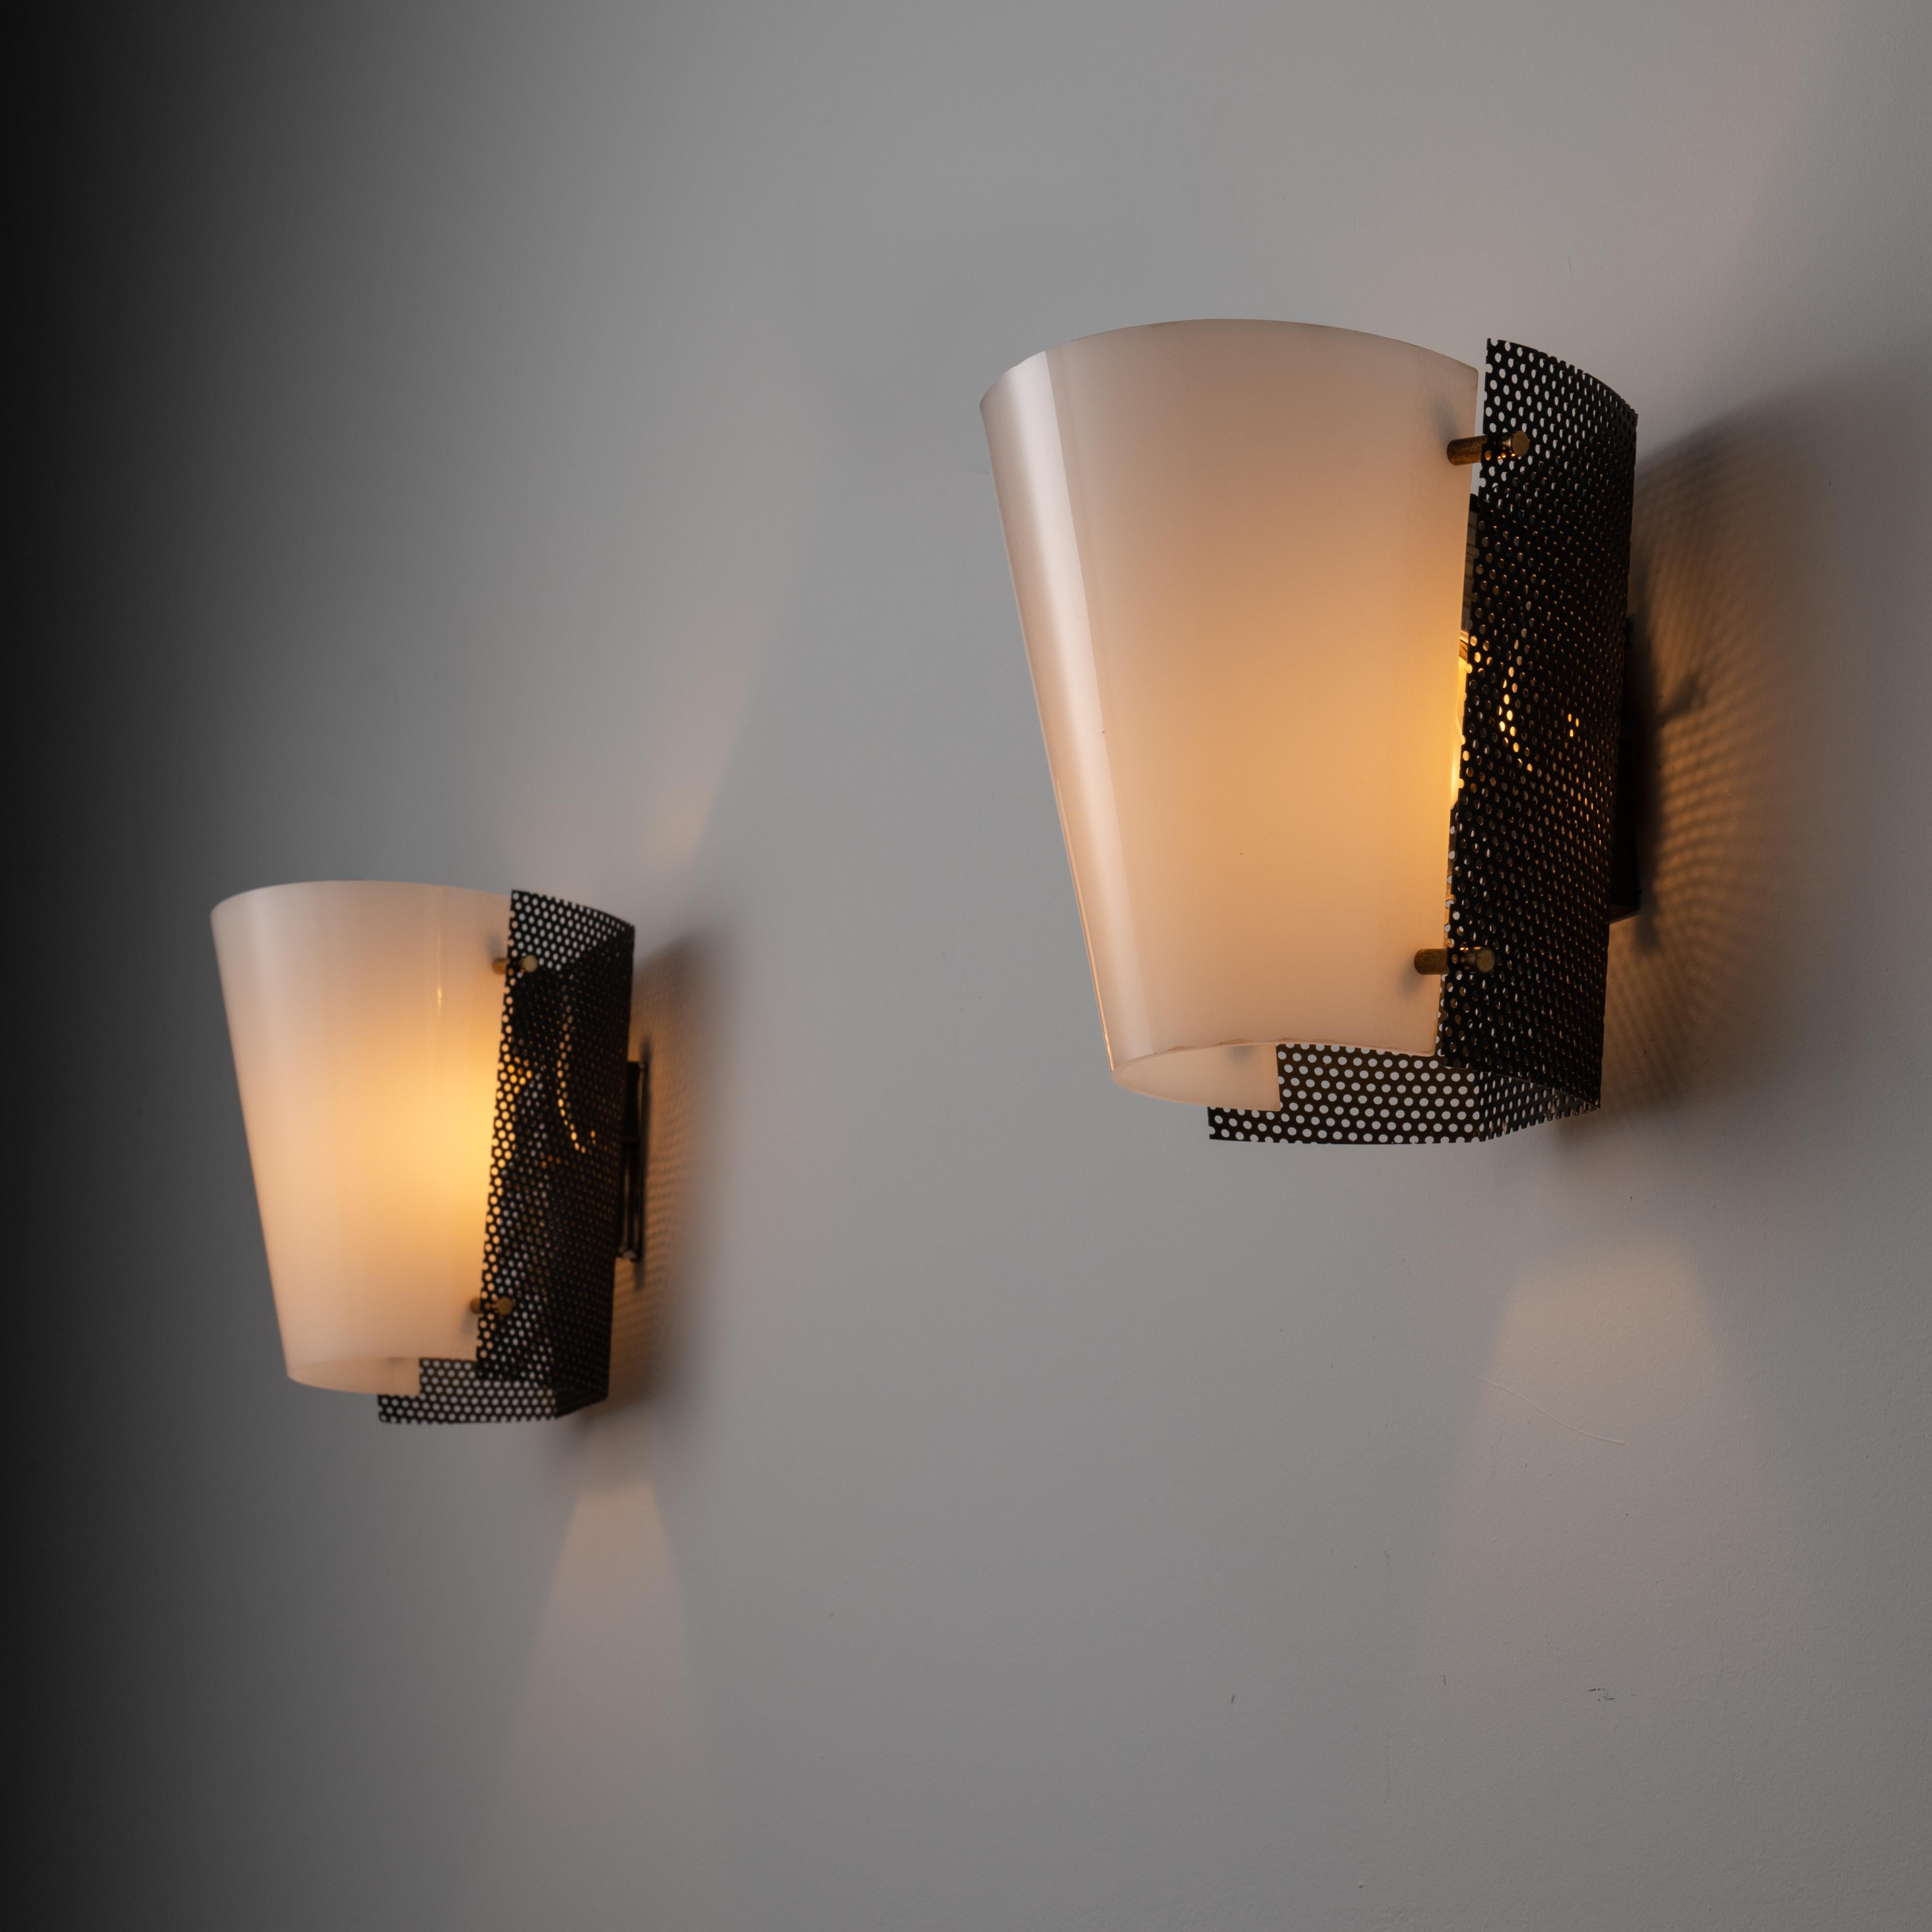 Pair of sconces by Stilnovo. Designed and manufactured in Italy, in 1955. Wall sconces with soft white acrylic diffusers, perforated black formed side paneling and brass hardware detailing. Each sconce holds one E27 bulb socket, adapted for the US.